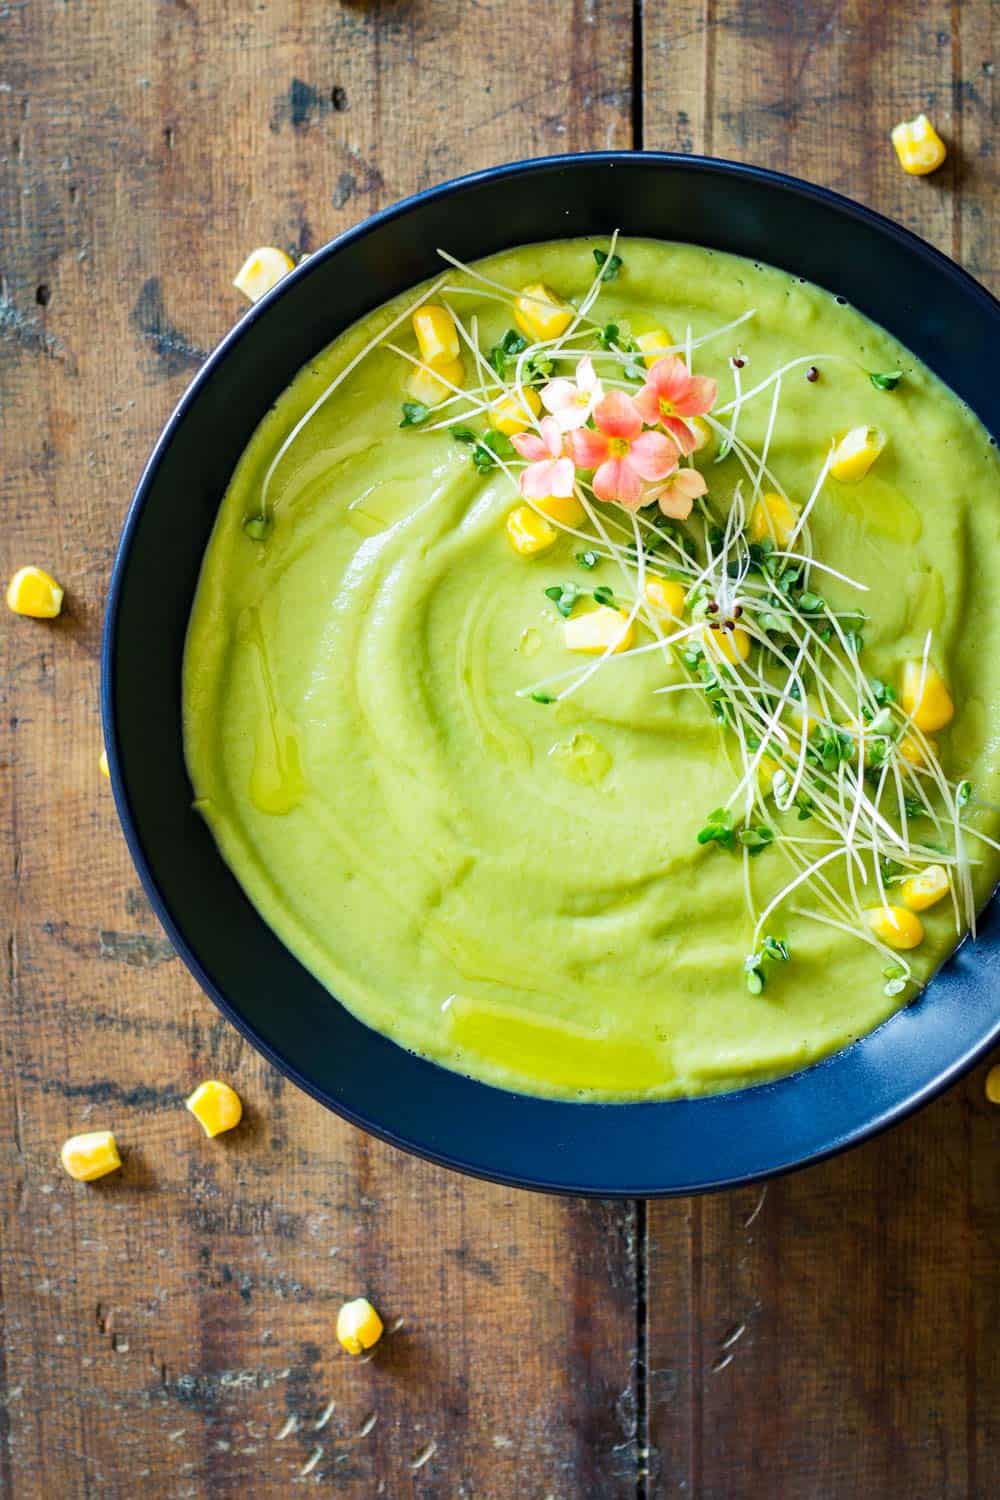 Vegan Cream Broccoli Soup garnished with fresh herbs, flowers and corn kernels.